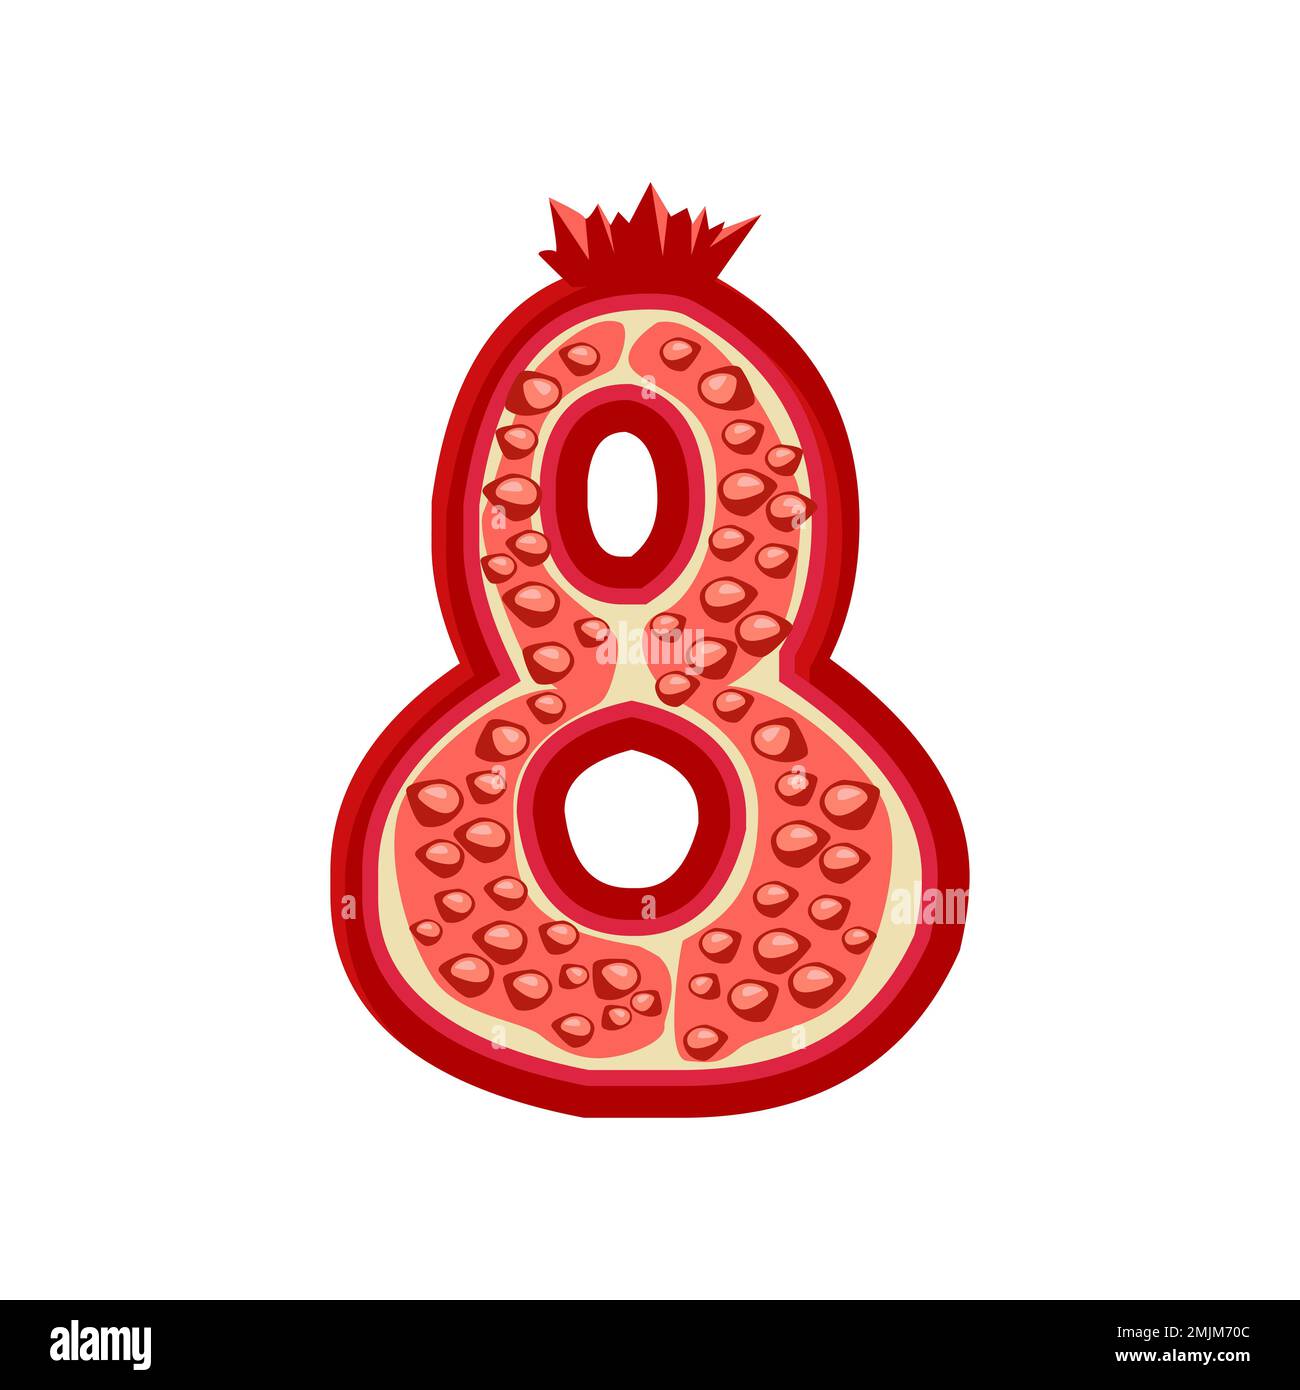 red number 8